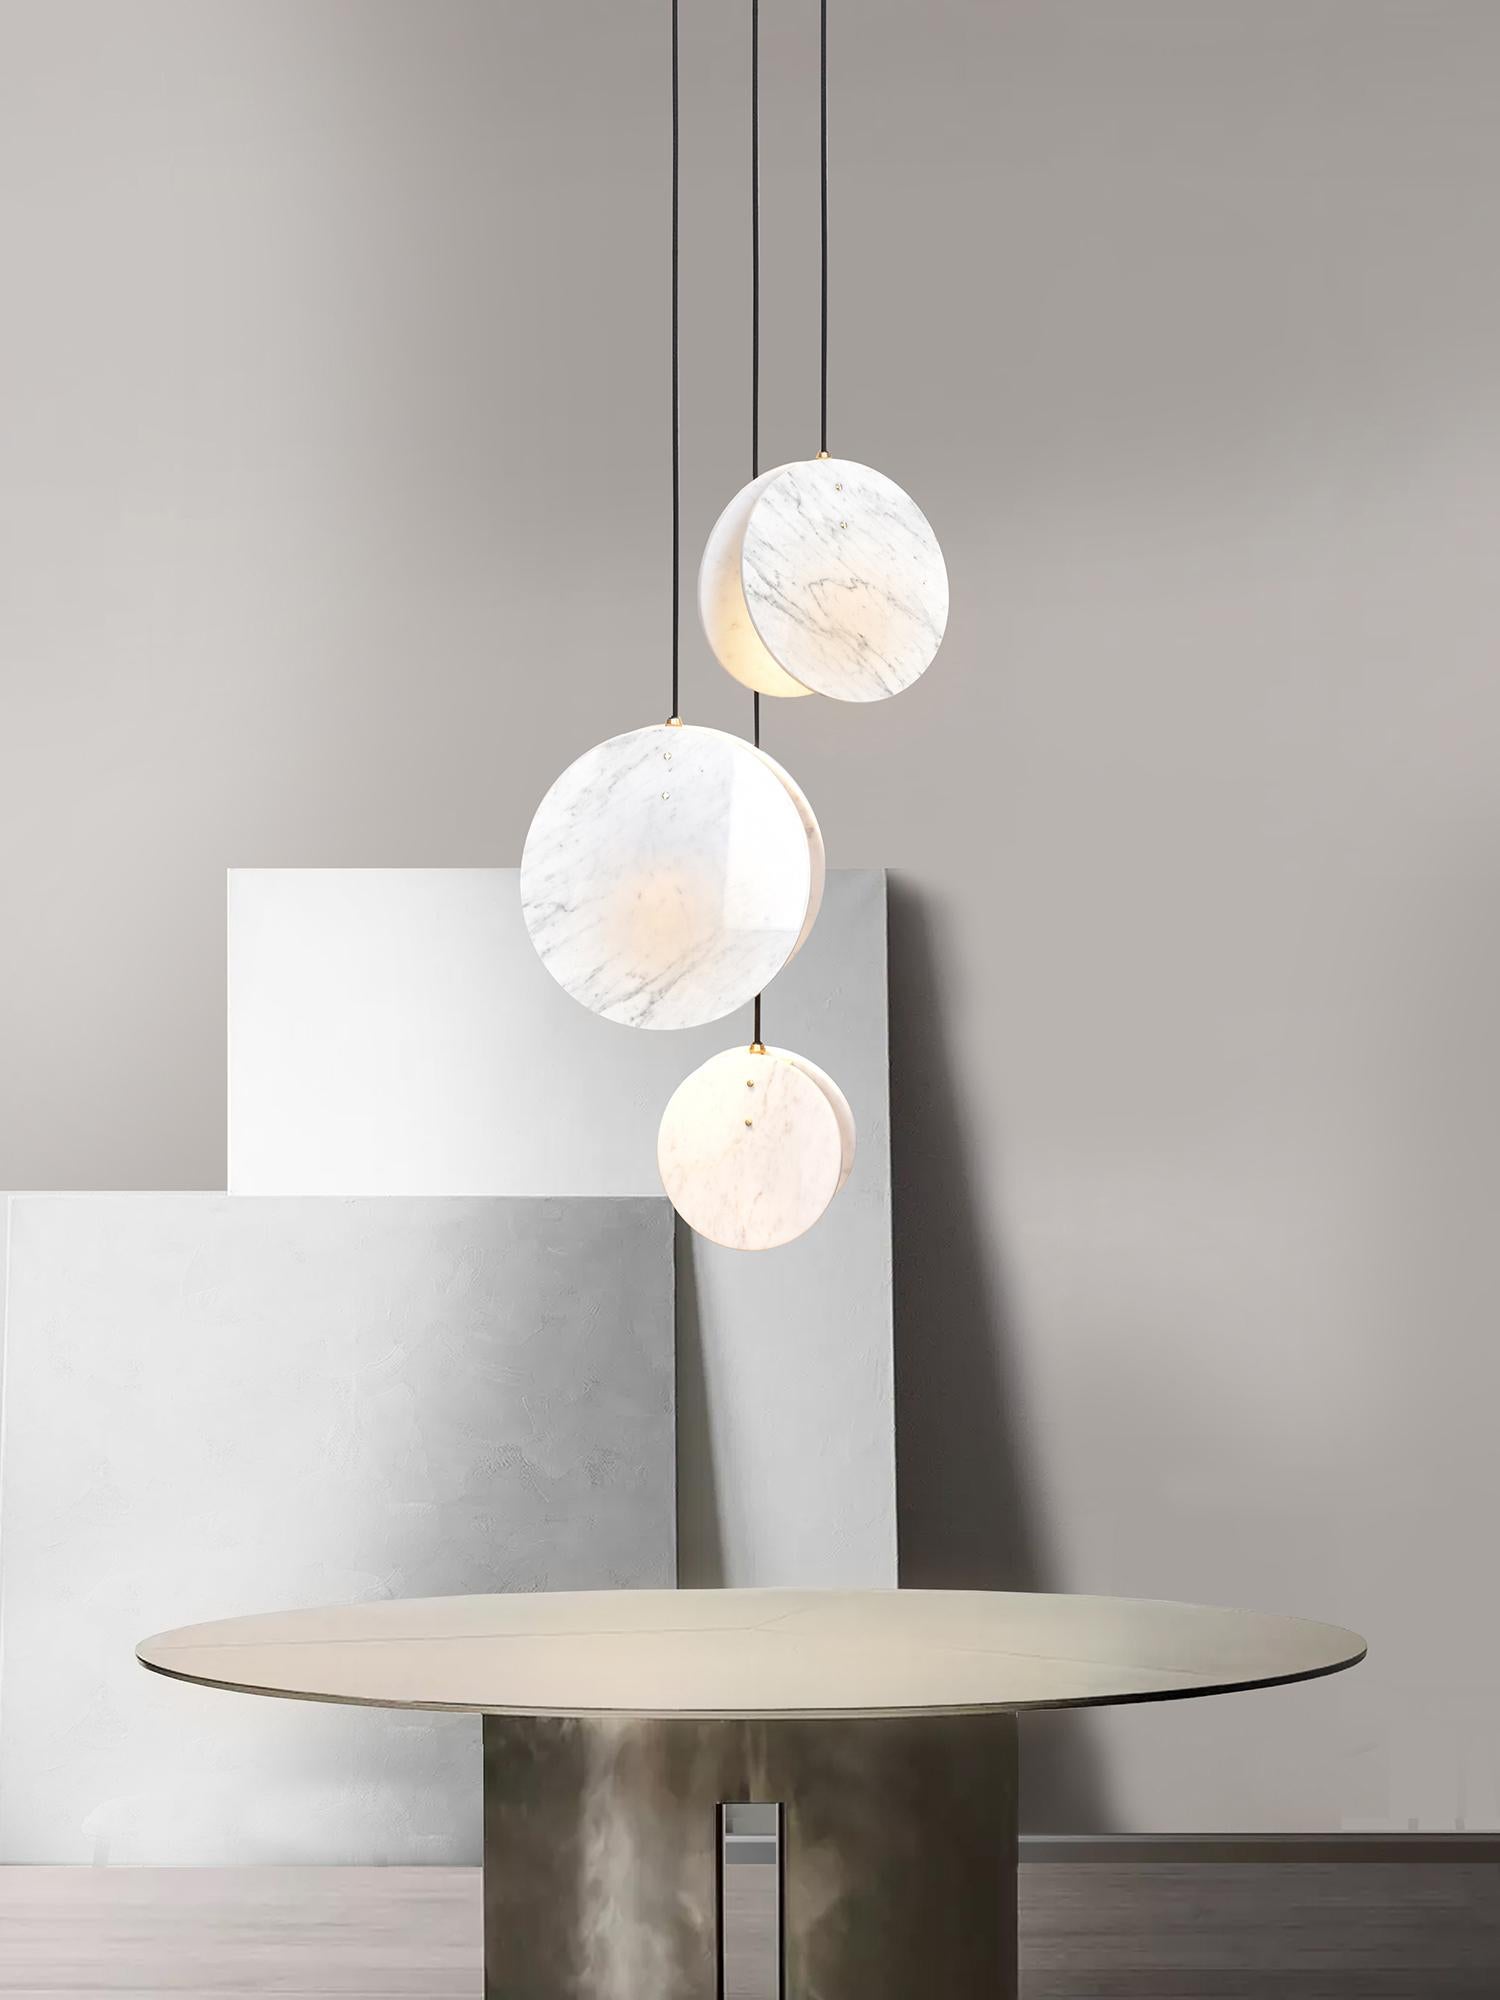 Inspired by our love for the British coastline and beaches. Made from a solid brass lamp housing, enclosed in two Carrara marble discs to create a soft, directional light source.

Lamp - GU10 (spotlight)